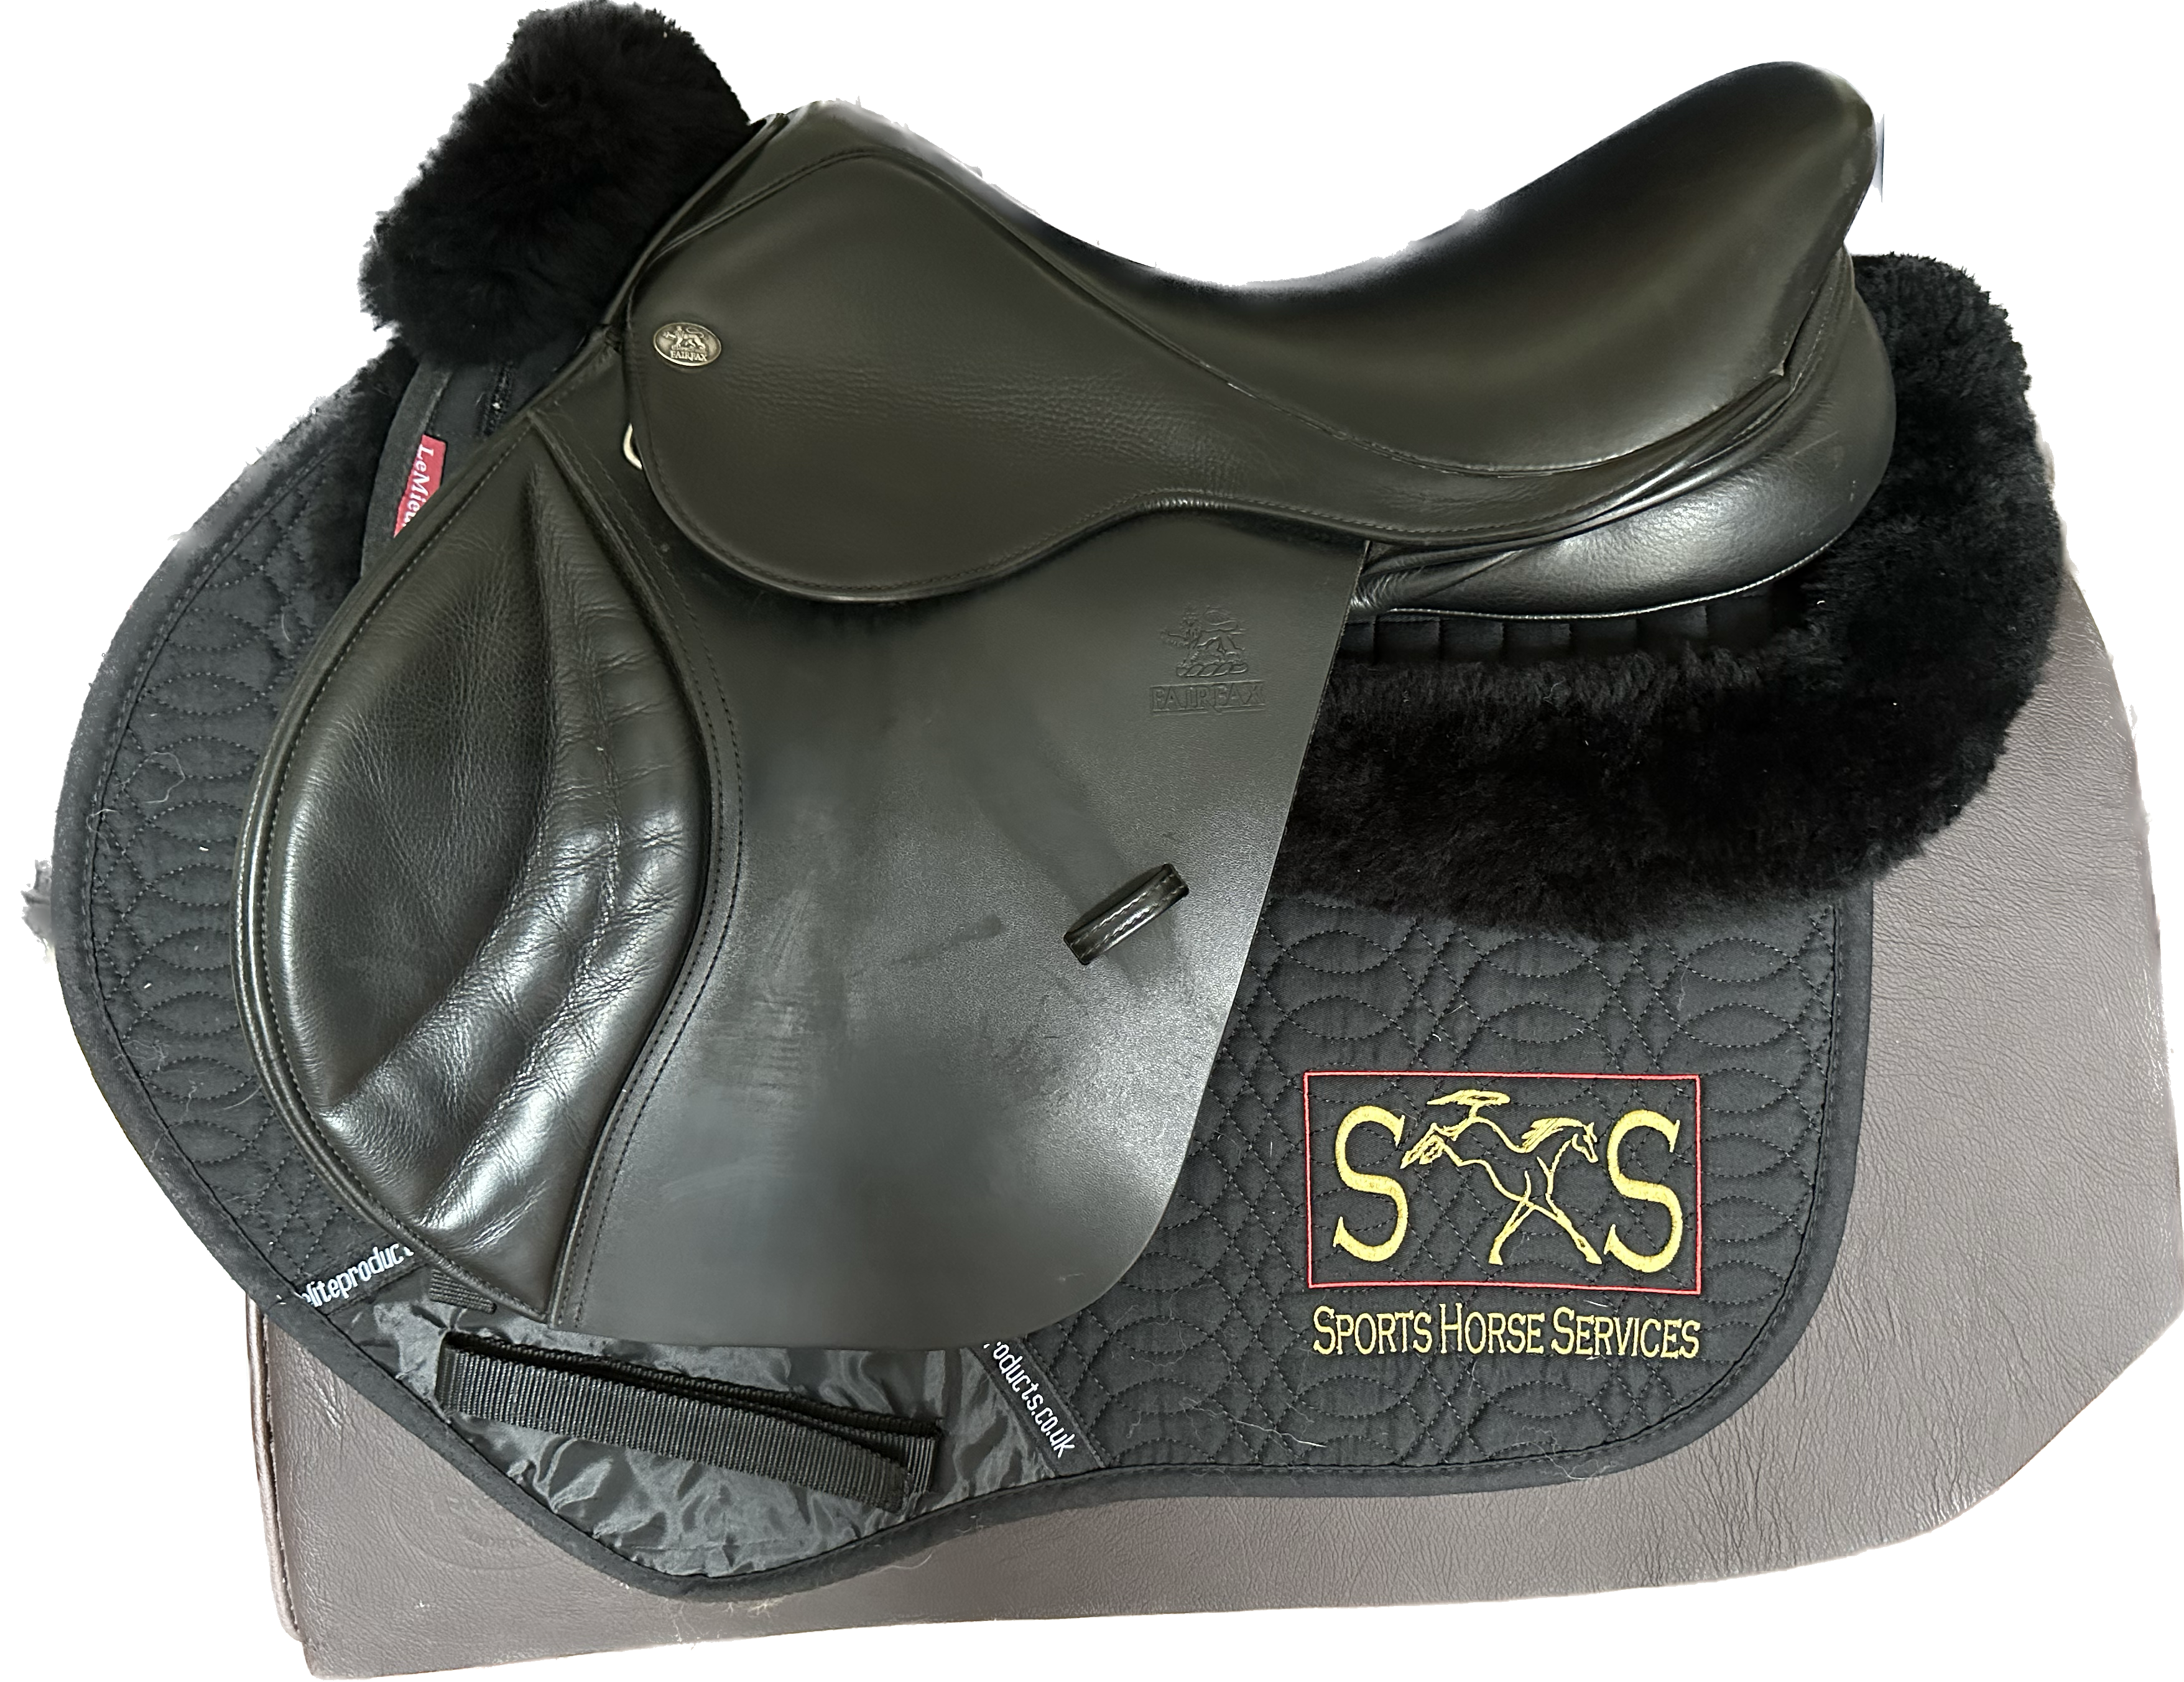 Fairfax Classic Jump Saddle 17 "  Black - In excellent condition USED